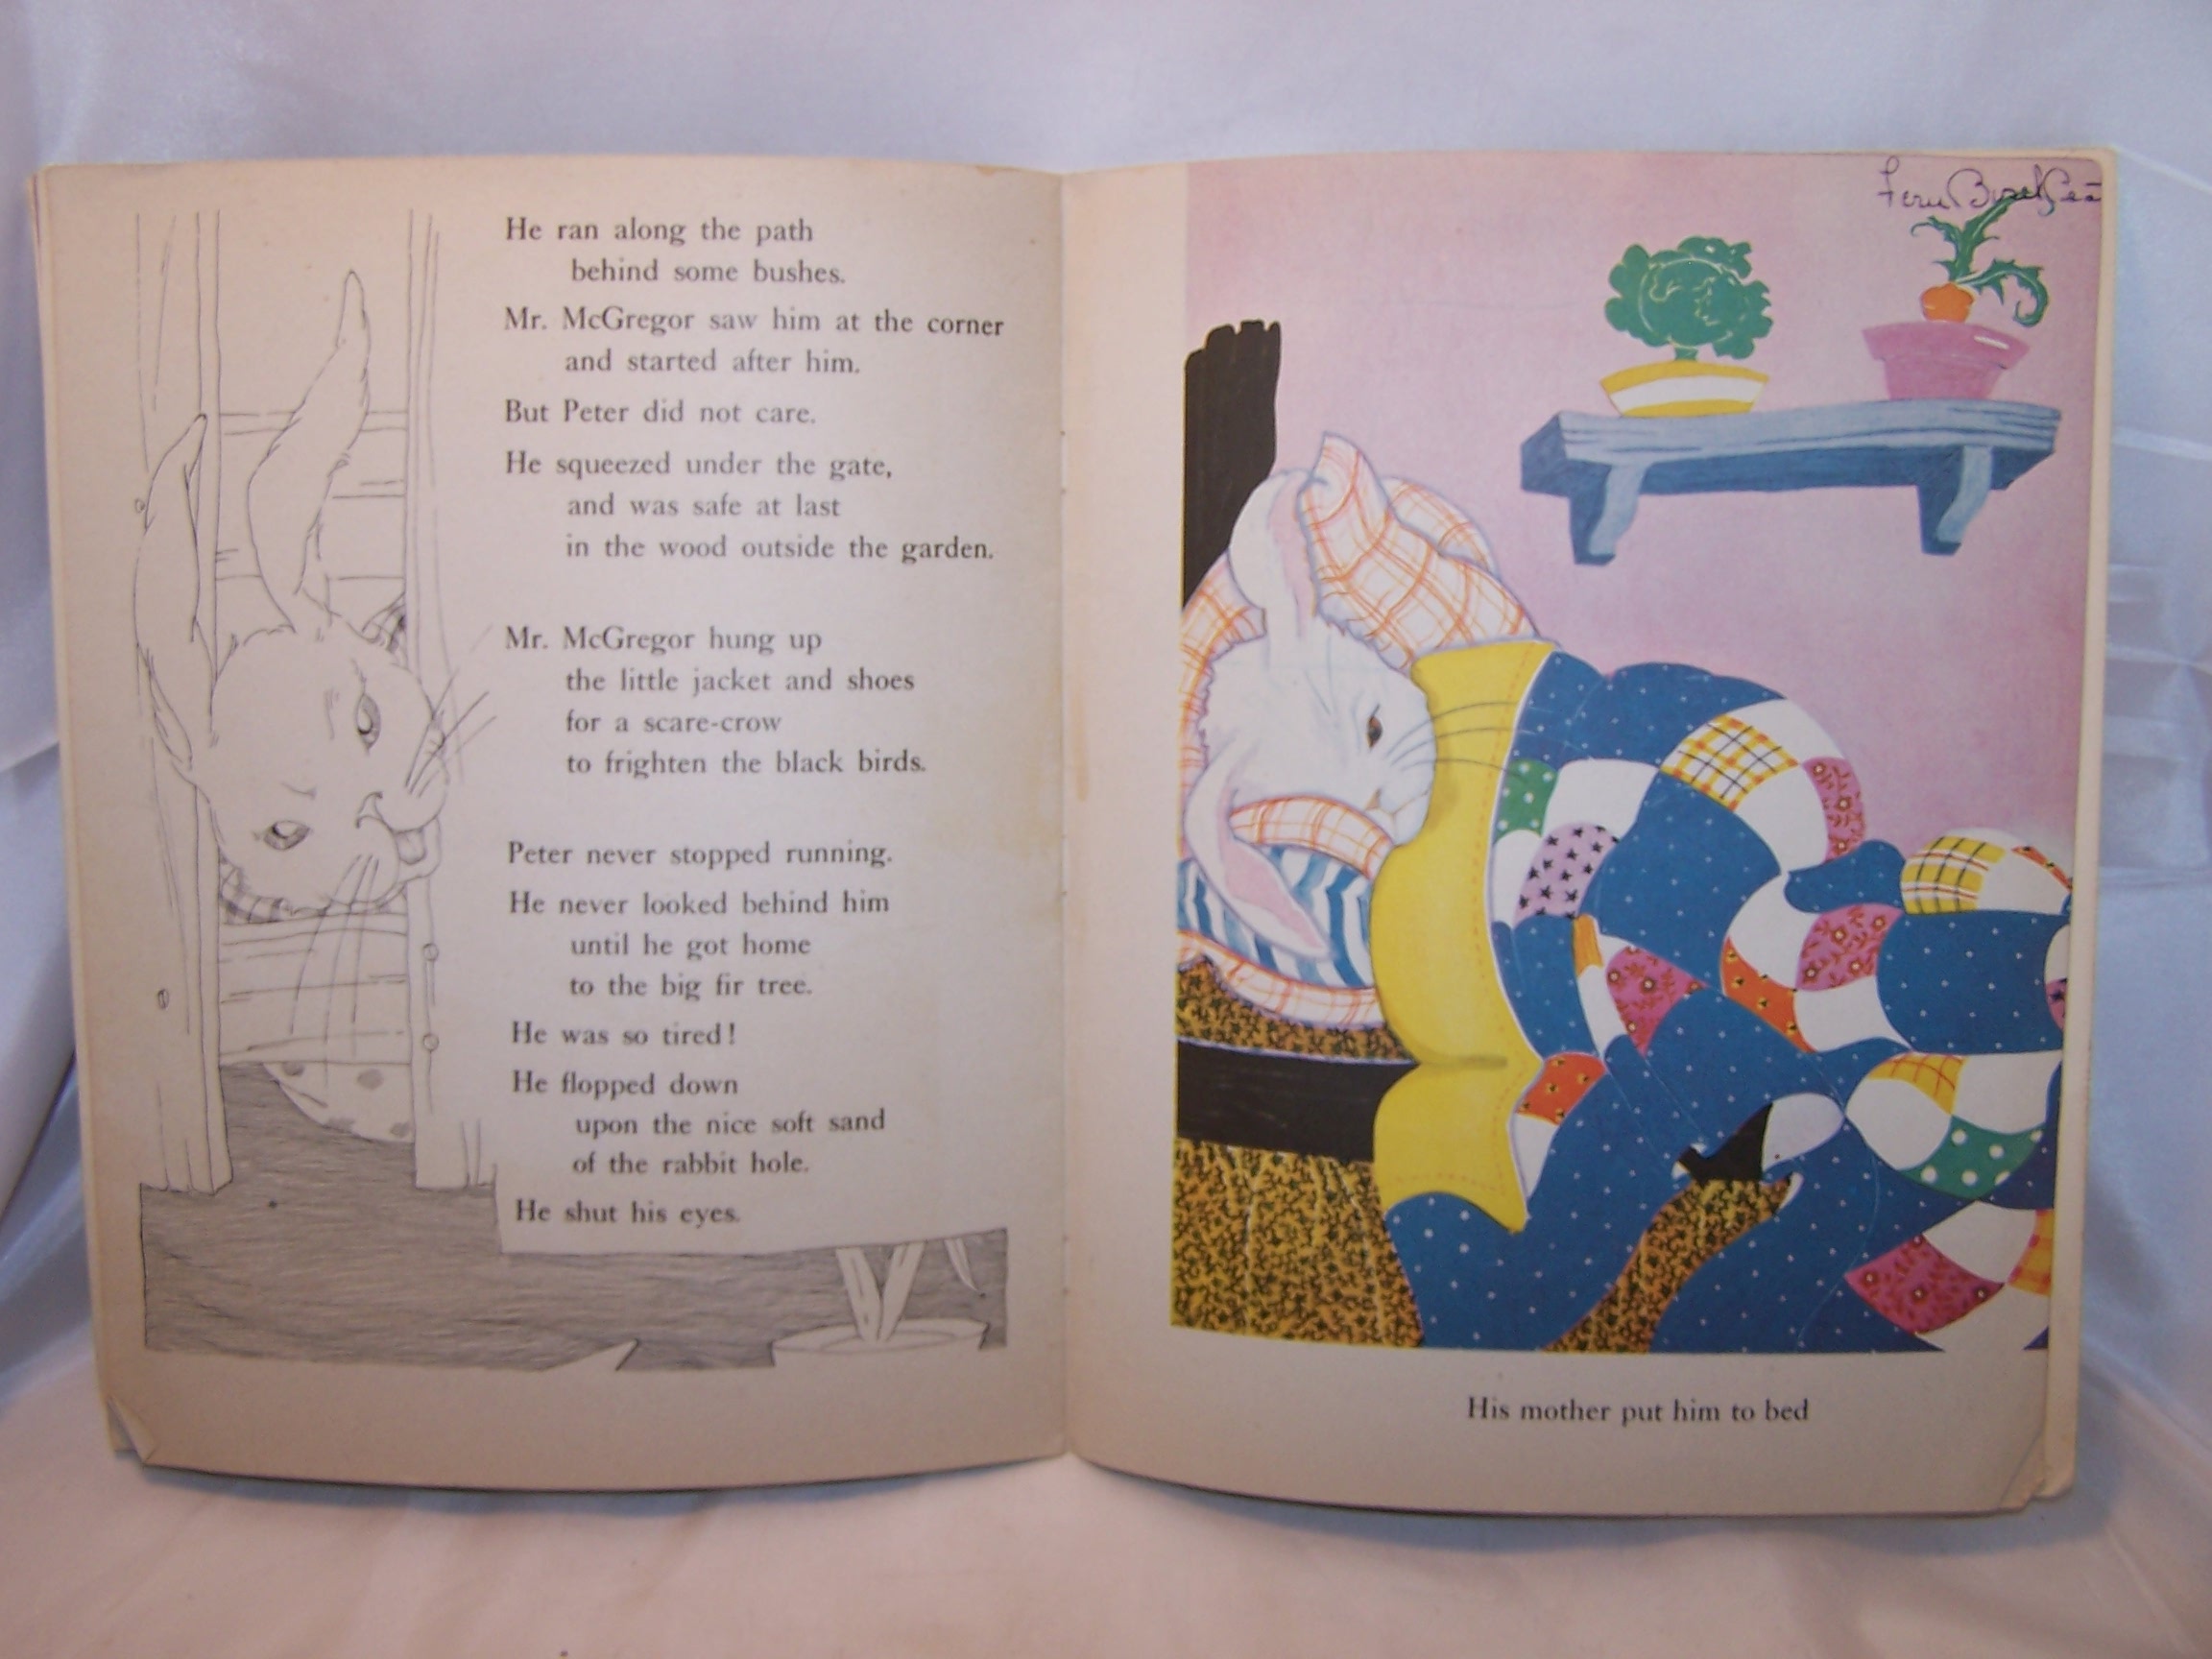 Image 7 of Peter Rabbit Book, Storybook, 1946, Aldredge and McKee, Prang Company Publishers